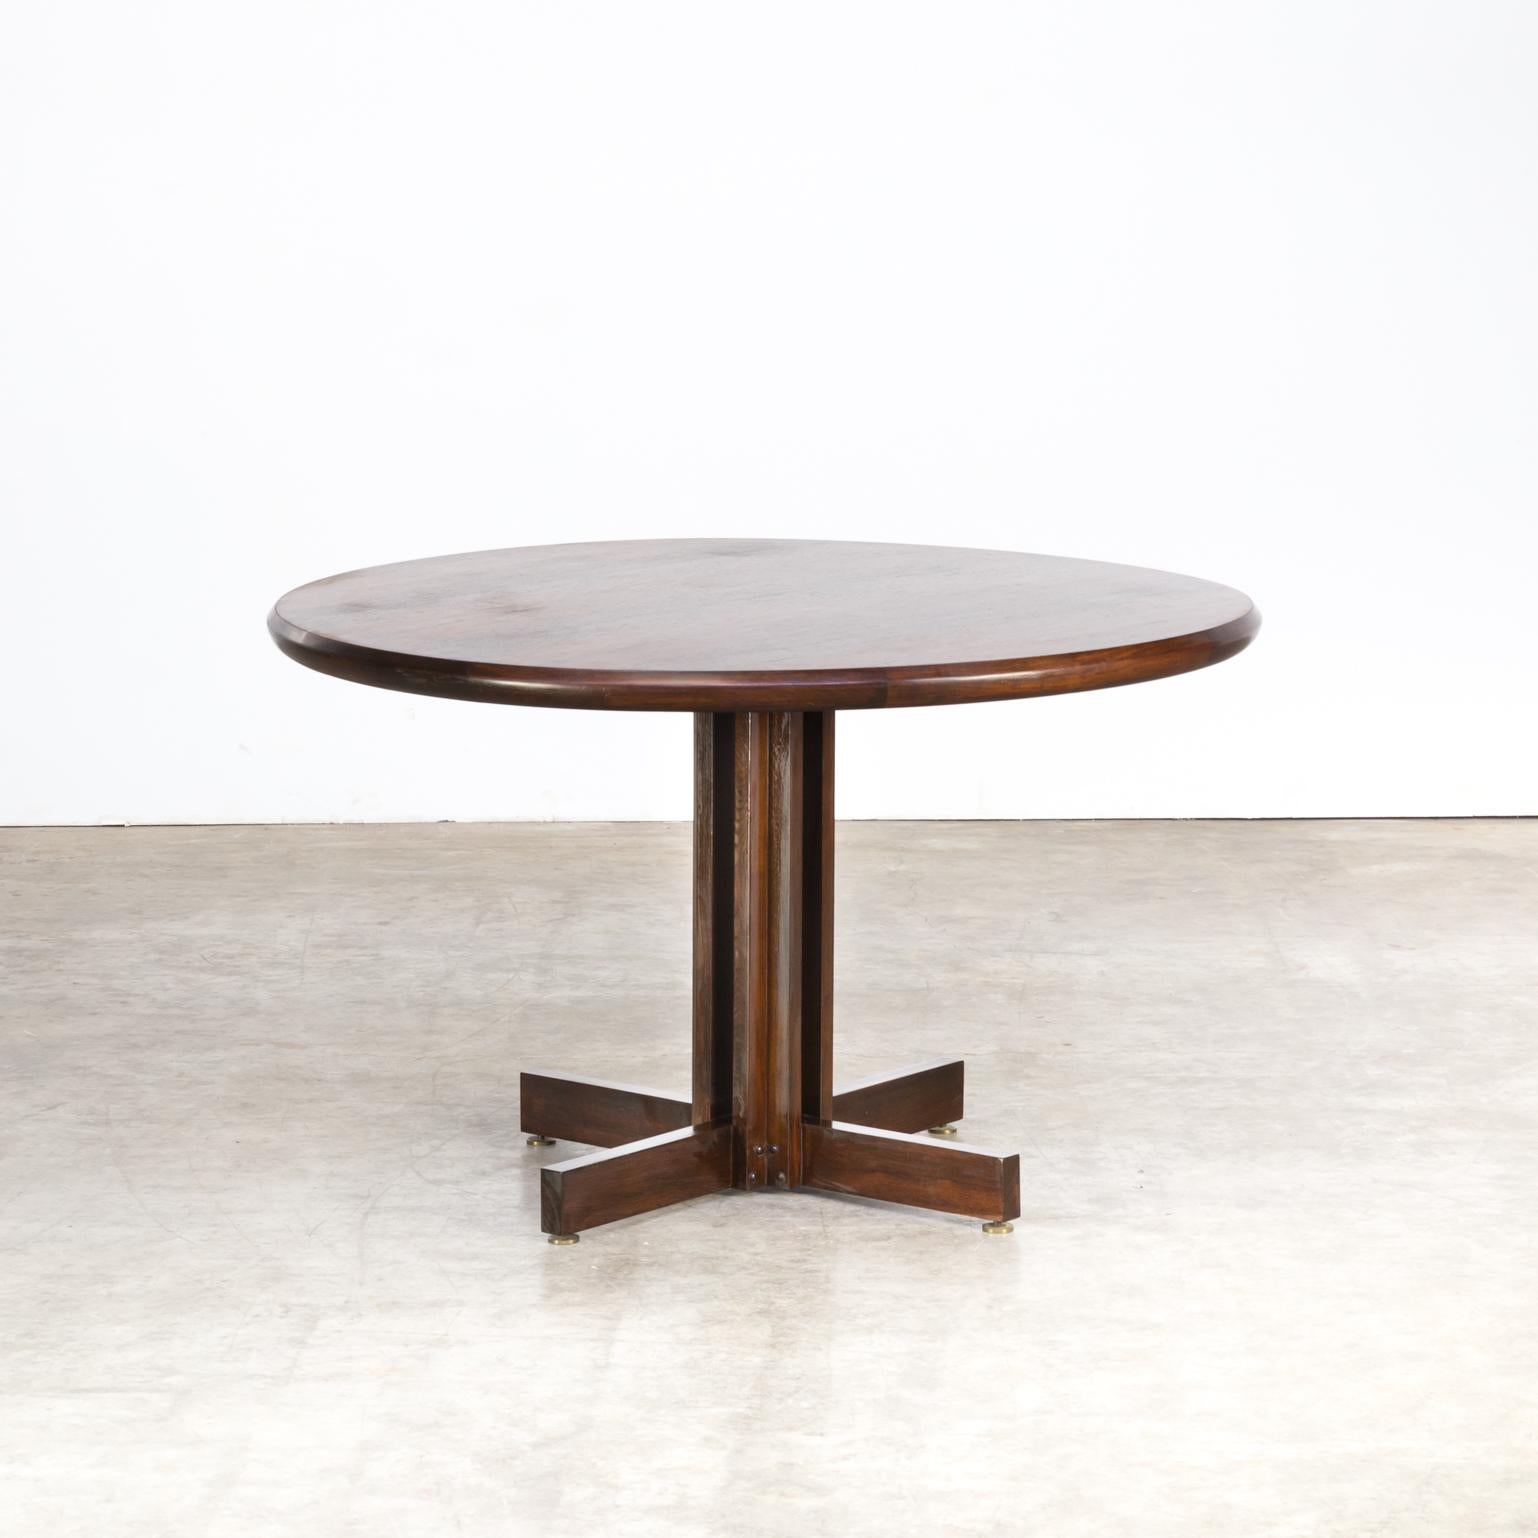 1980s rosewood round dining table in the style of Joaquim Tenreiro. Good condition consistent with age and use.